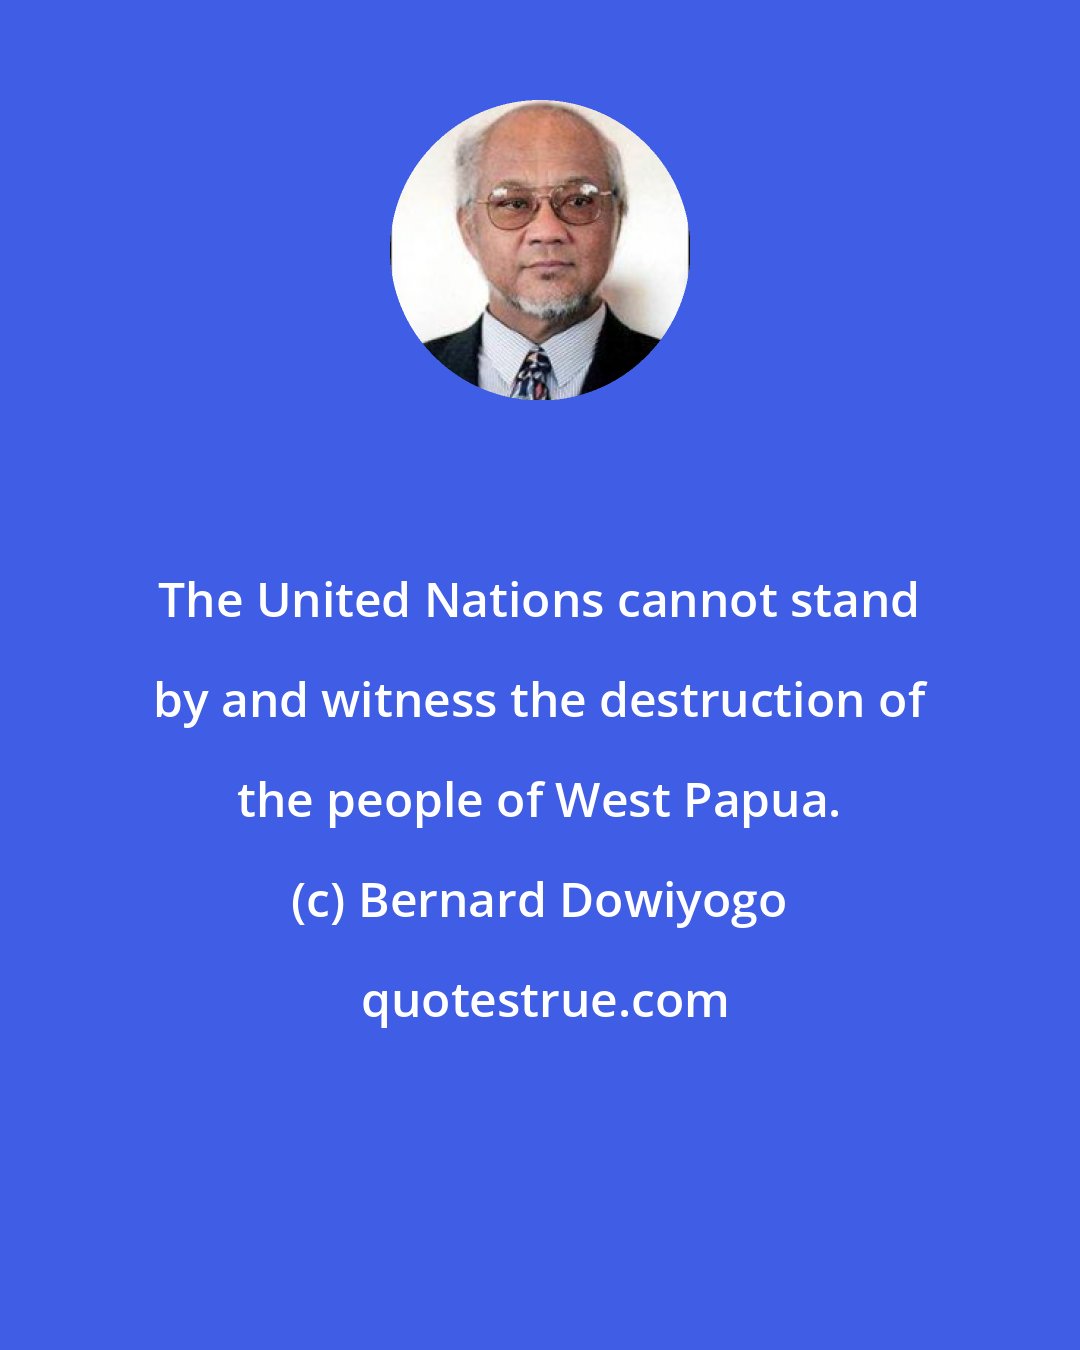 Bernard Dowiyogo: The United Nations cannot stand by and witness the destruction of the people of West Papua.